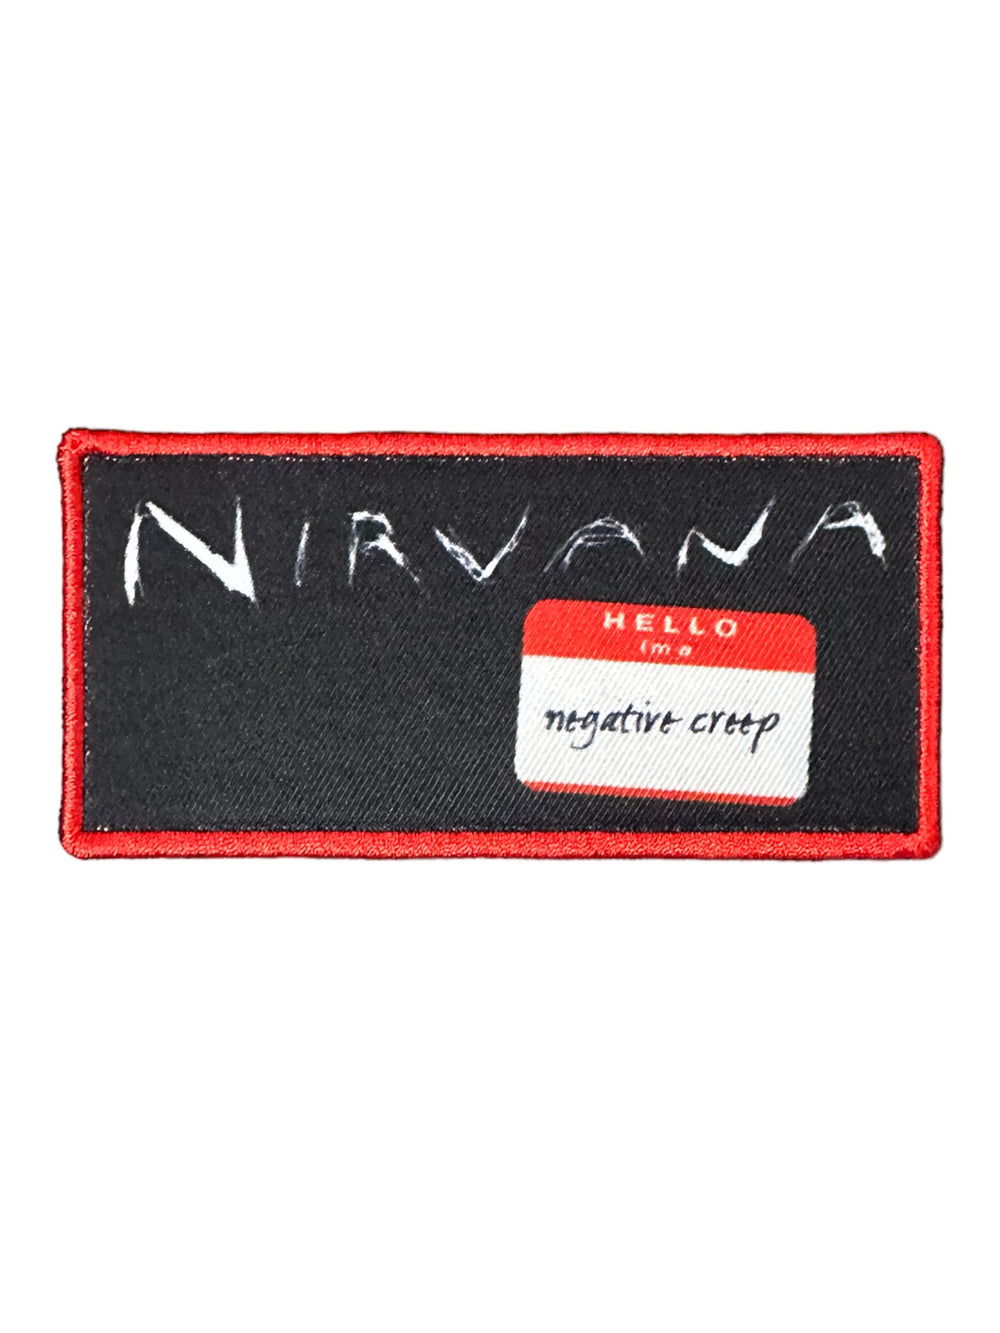 Nirvana Negative Creep Official Woven Patch Brand New